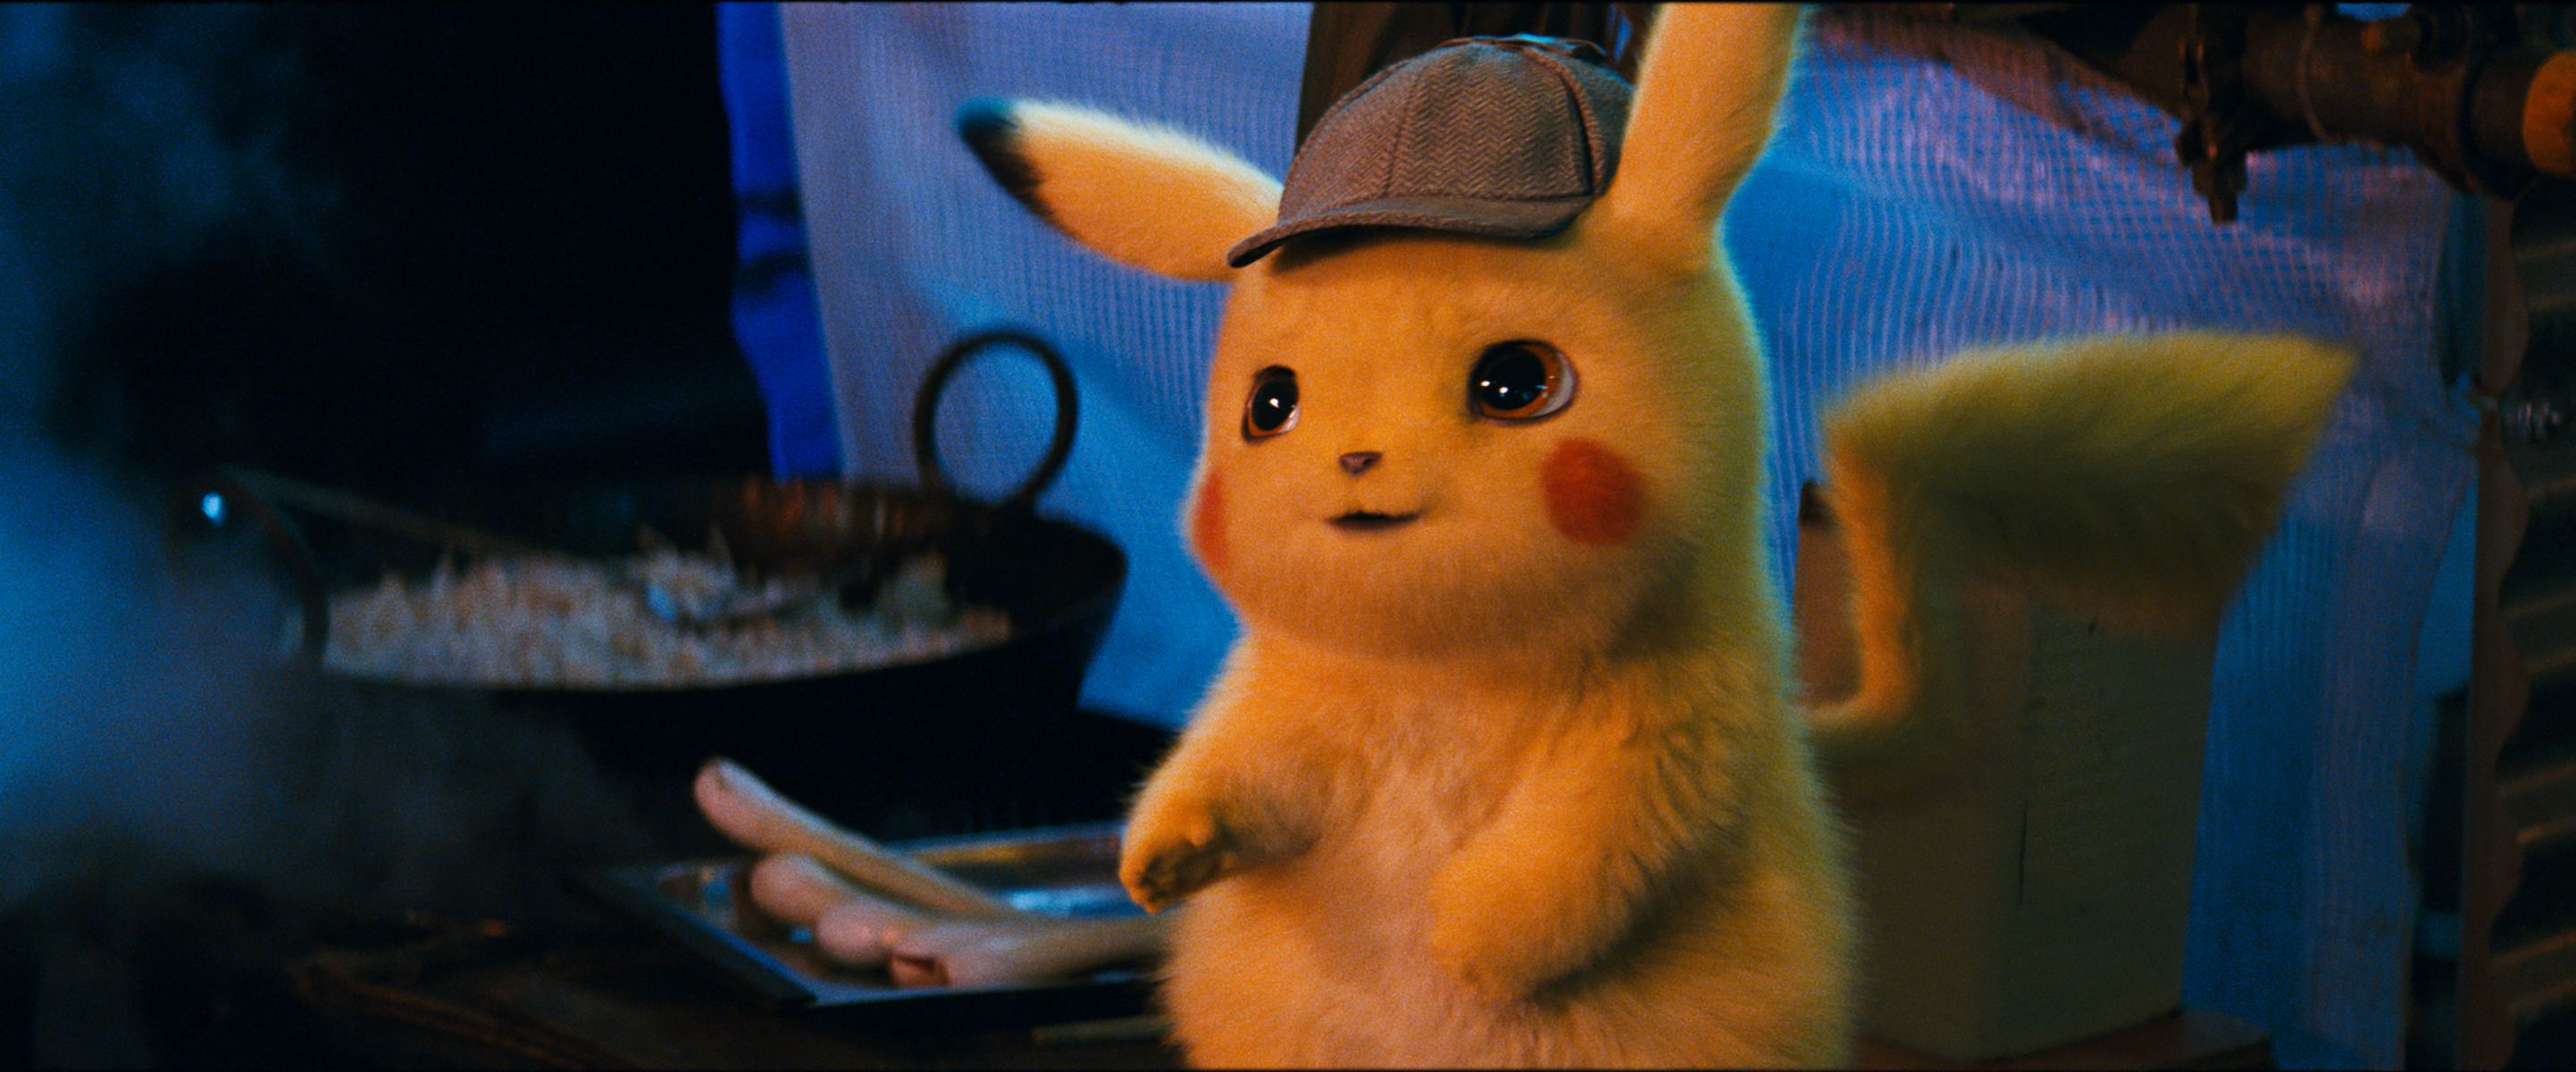 6 Pokemon Movies We'd Like To See After Detective Pikachu